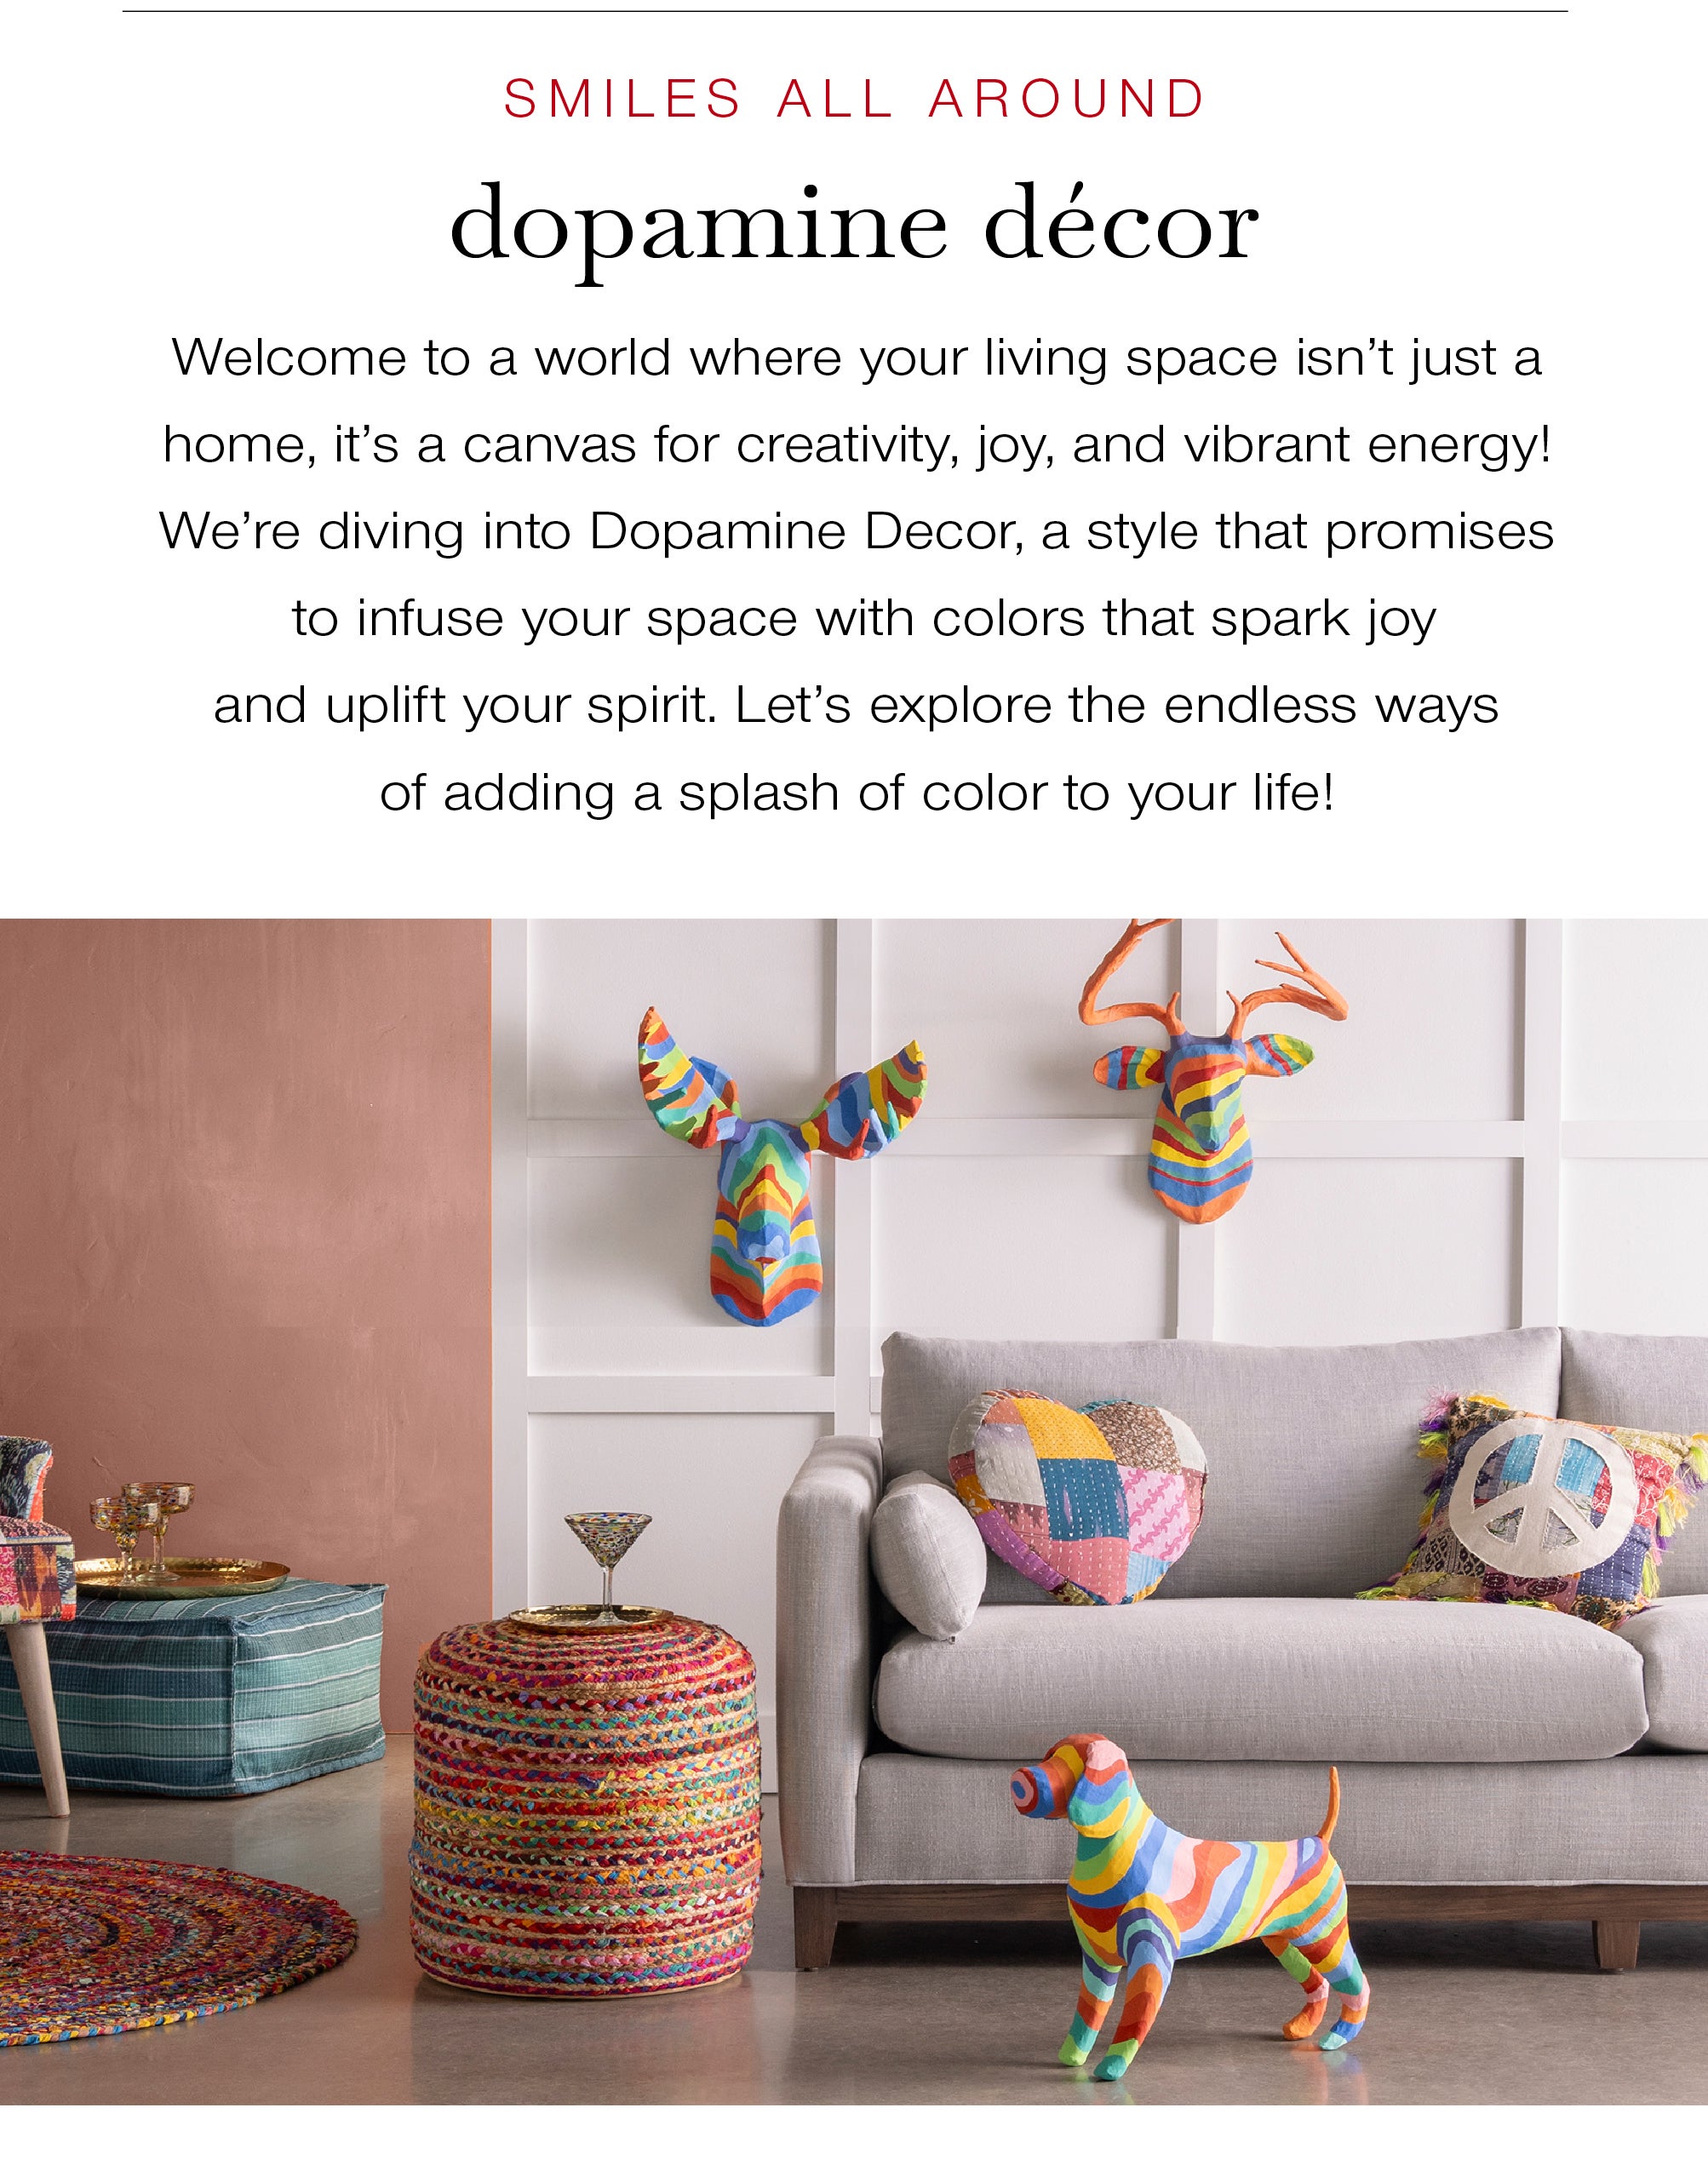 SMILE ALL AROUND<br />Dopamine Décor<br />Welcome to a world where your living space isn't just a home, it's a canvas for creativity, joy, and vibrant energy! We're diving into Dopamine Decor, a style that promises to infuse your space with colors that spark joy and uplift your spirit. Let’s explore the endless ways of adding a splash of color to your life!